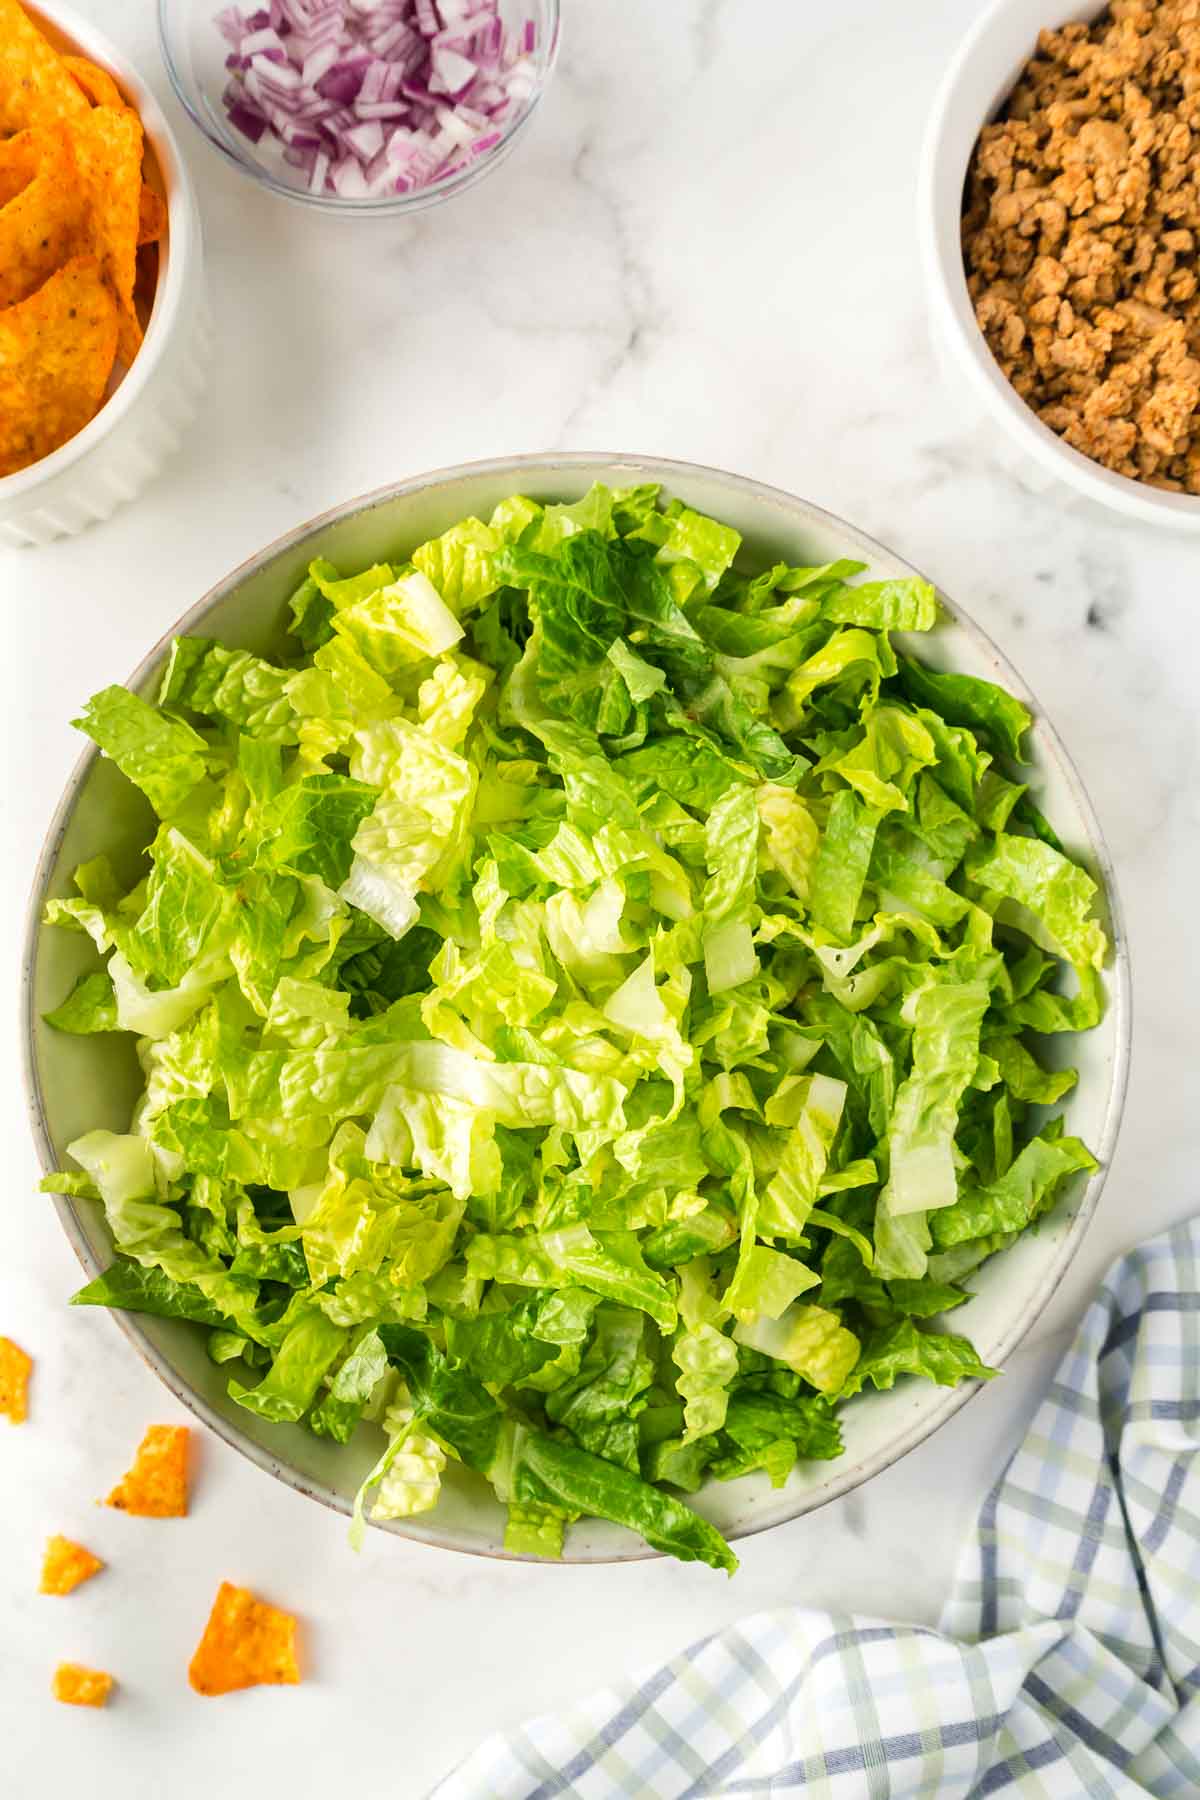 Romaine lettuce in a large salad bowl.